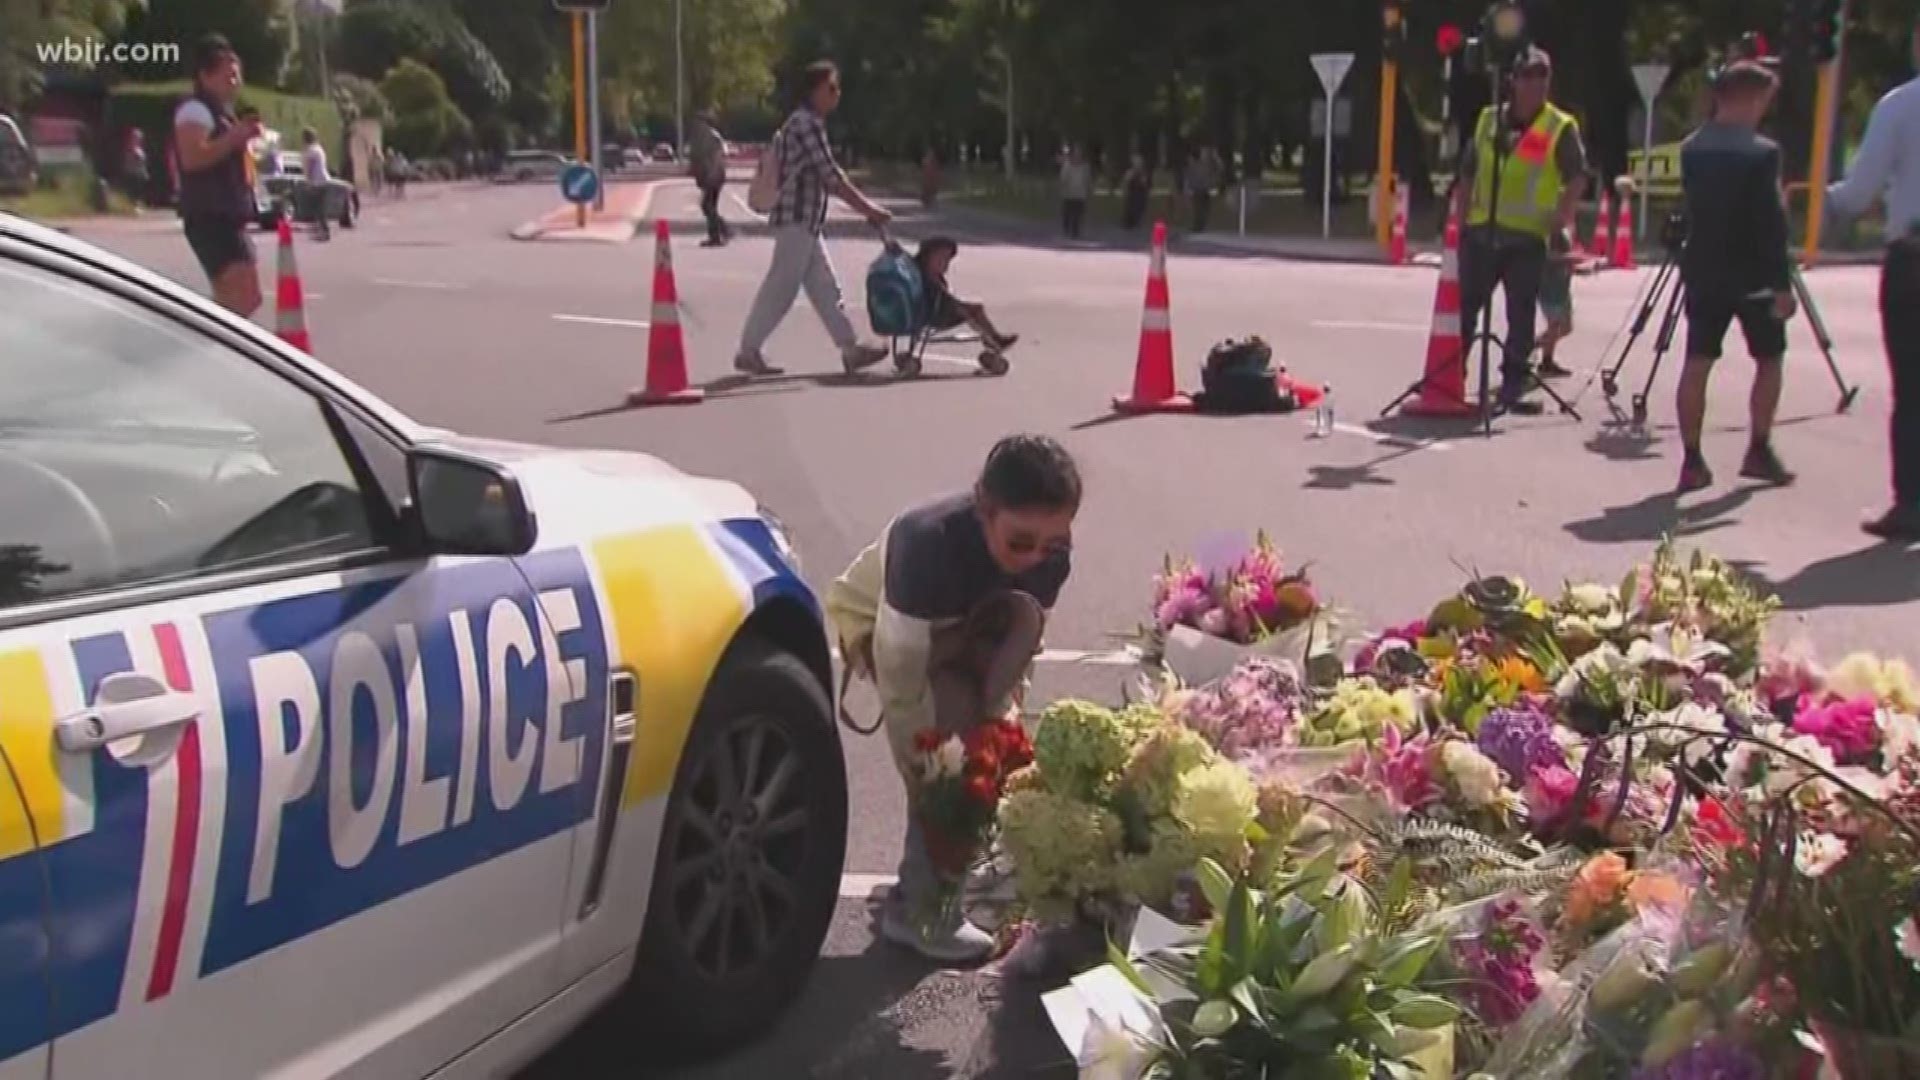 Experts say when large scale hate crimes happen -- like the deadly shooting in New Zealand -- they often bring attention to smaller incidents that otherwise would have gone unnoticed.